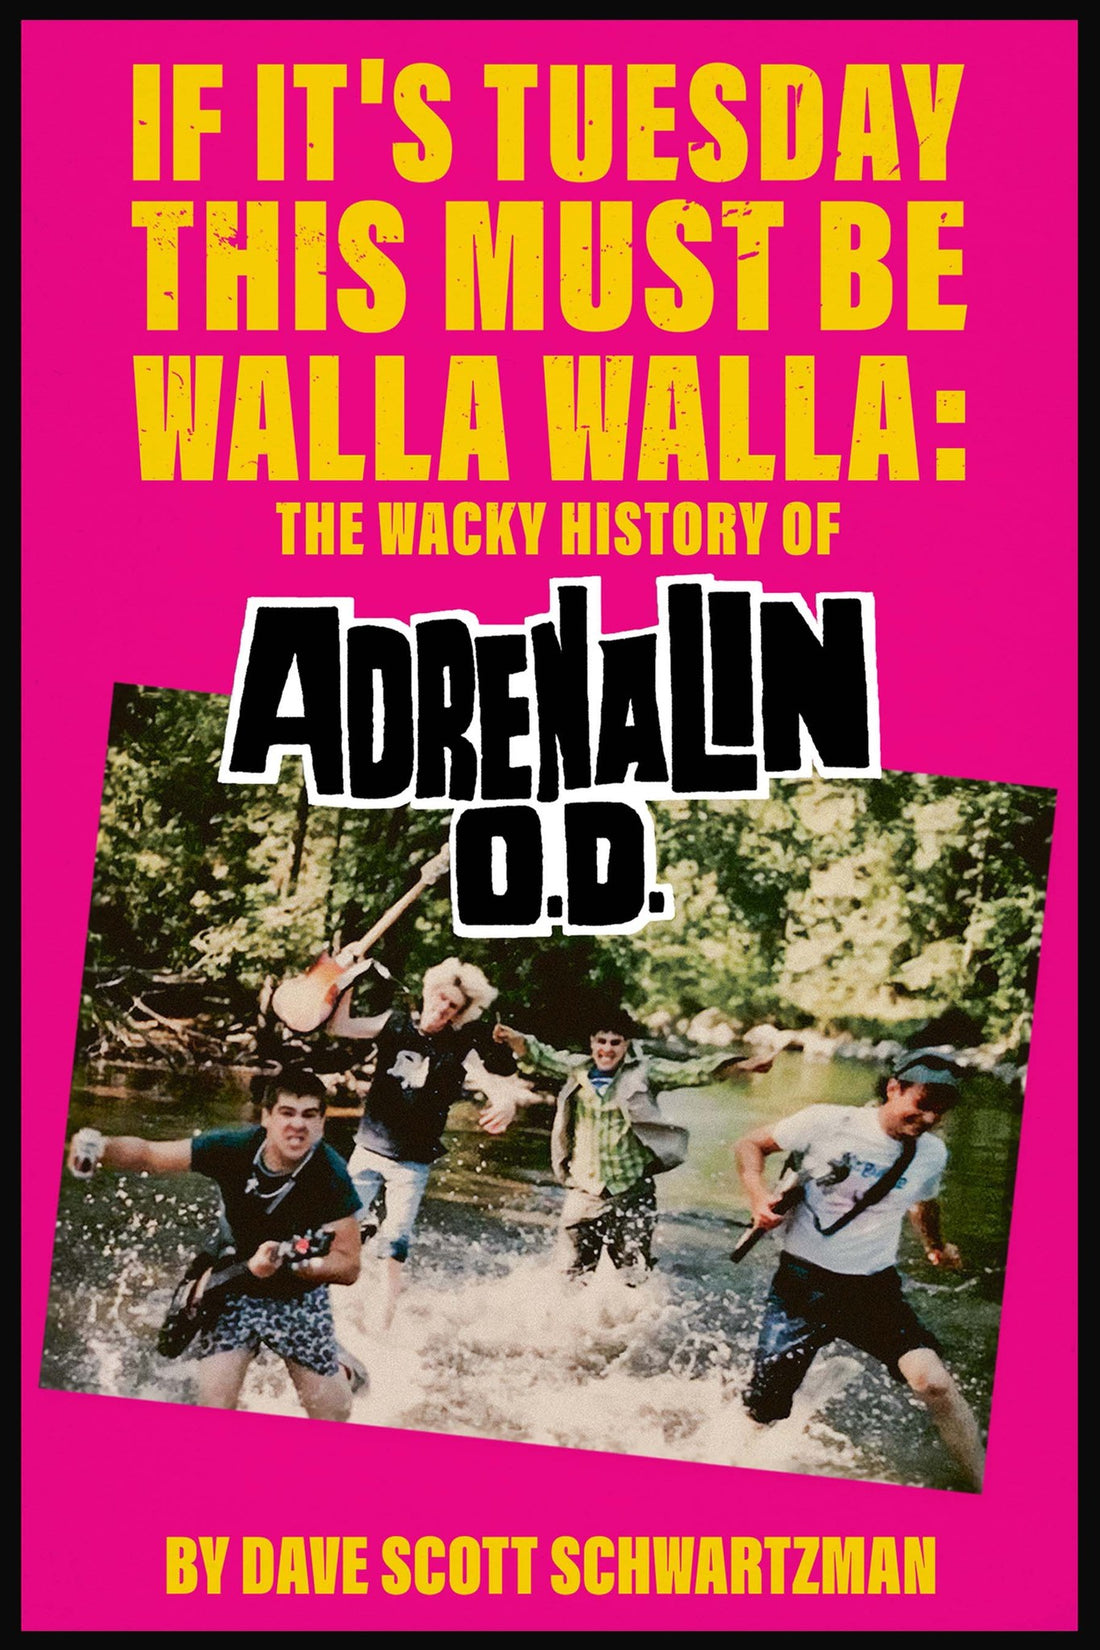 EXCLUSIVE: DIWULF RELEASES FIRST EXCERPT FROM DAVE SCOTT SCHWARTZMAN'S UPCOMING A.O.D. BOOK - "IF IT'S TUESDAY THIS MUST BE WALLA WALLA: THE WACKY HISTORY OF ADRENALIN O.D.